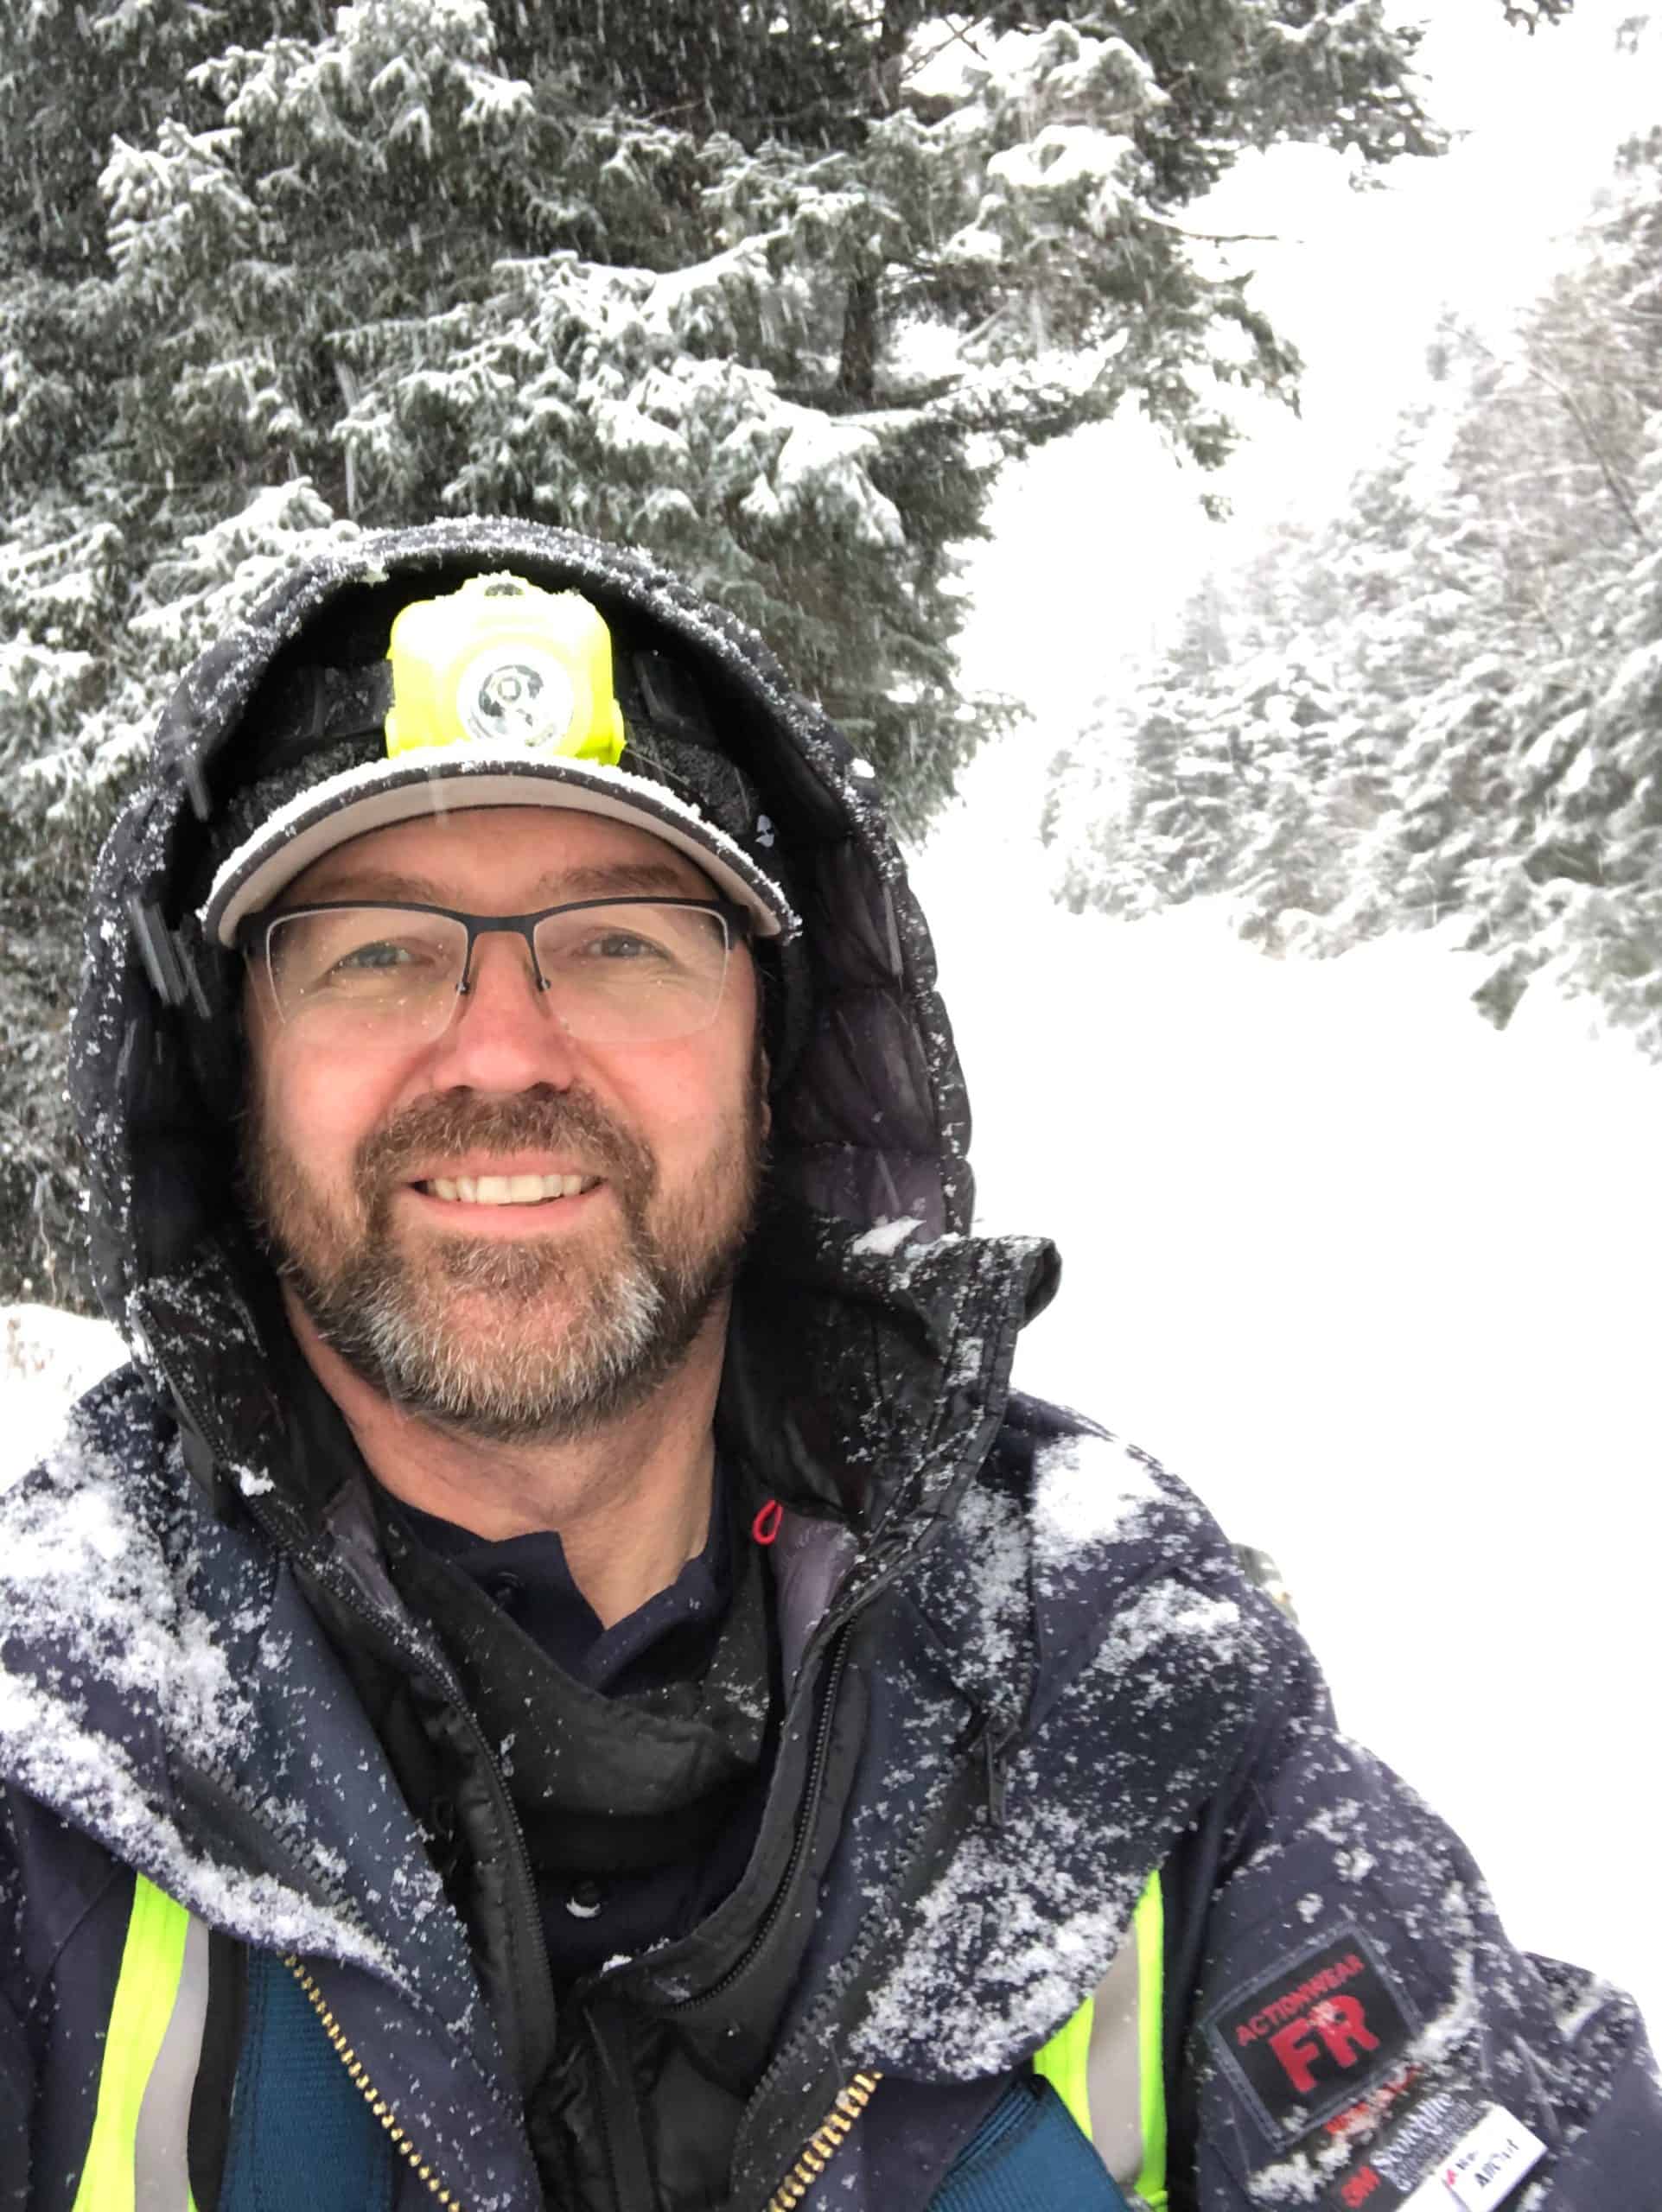 Denker smiles in a heavy jacket and cap, hoodie up, as snow falls around him.